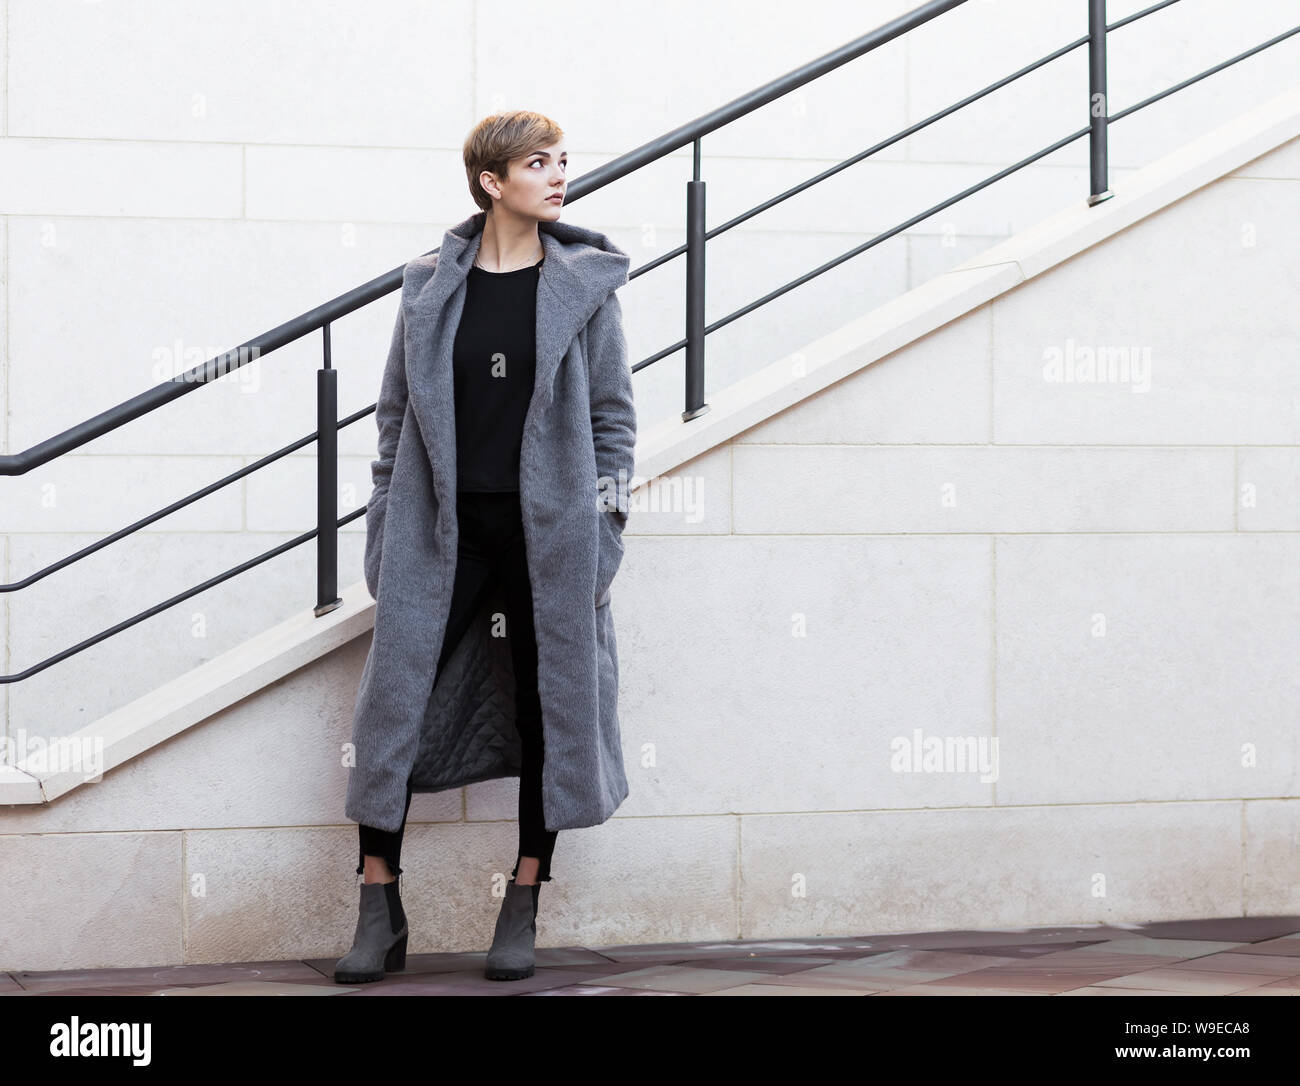 Stylish woman in gray coat looks up on stairs background Stock Photo